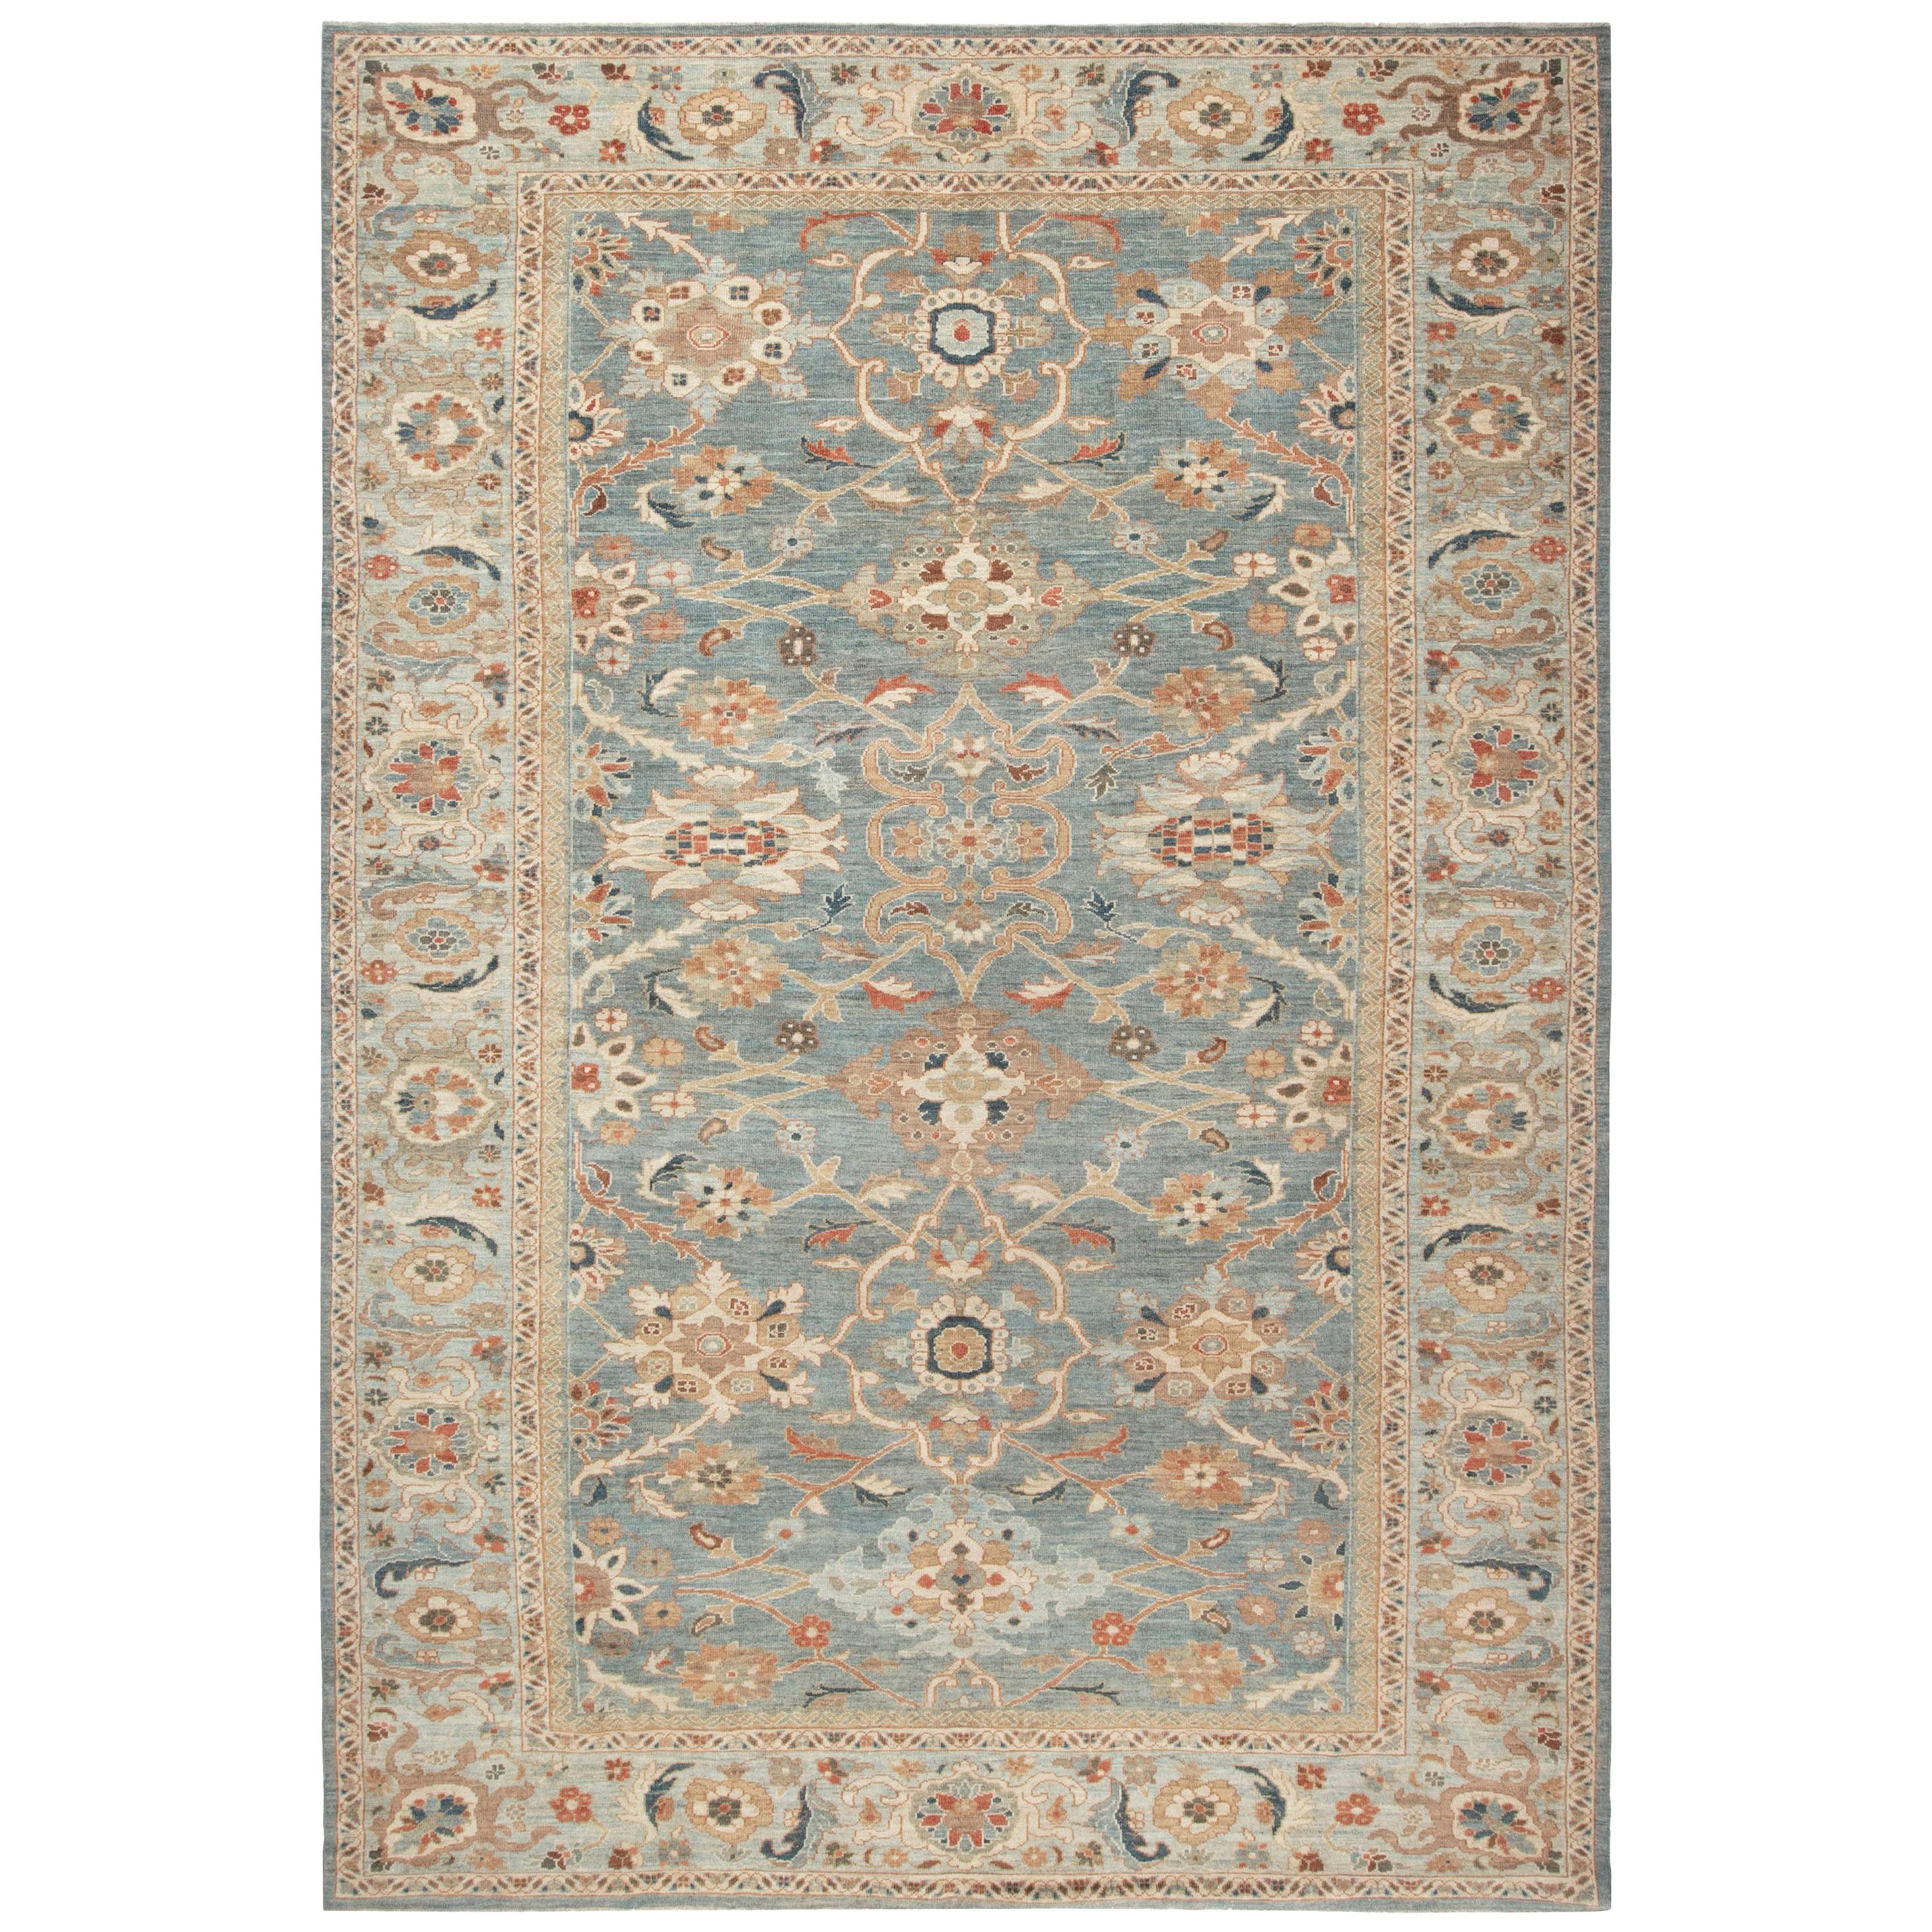 Traditional Sultanabad Design Beige, Off-white, Red and Navy Rug